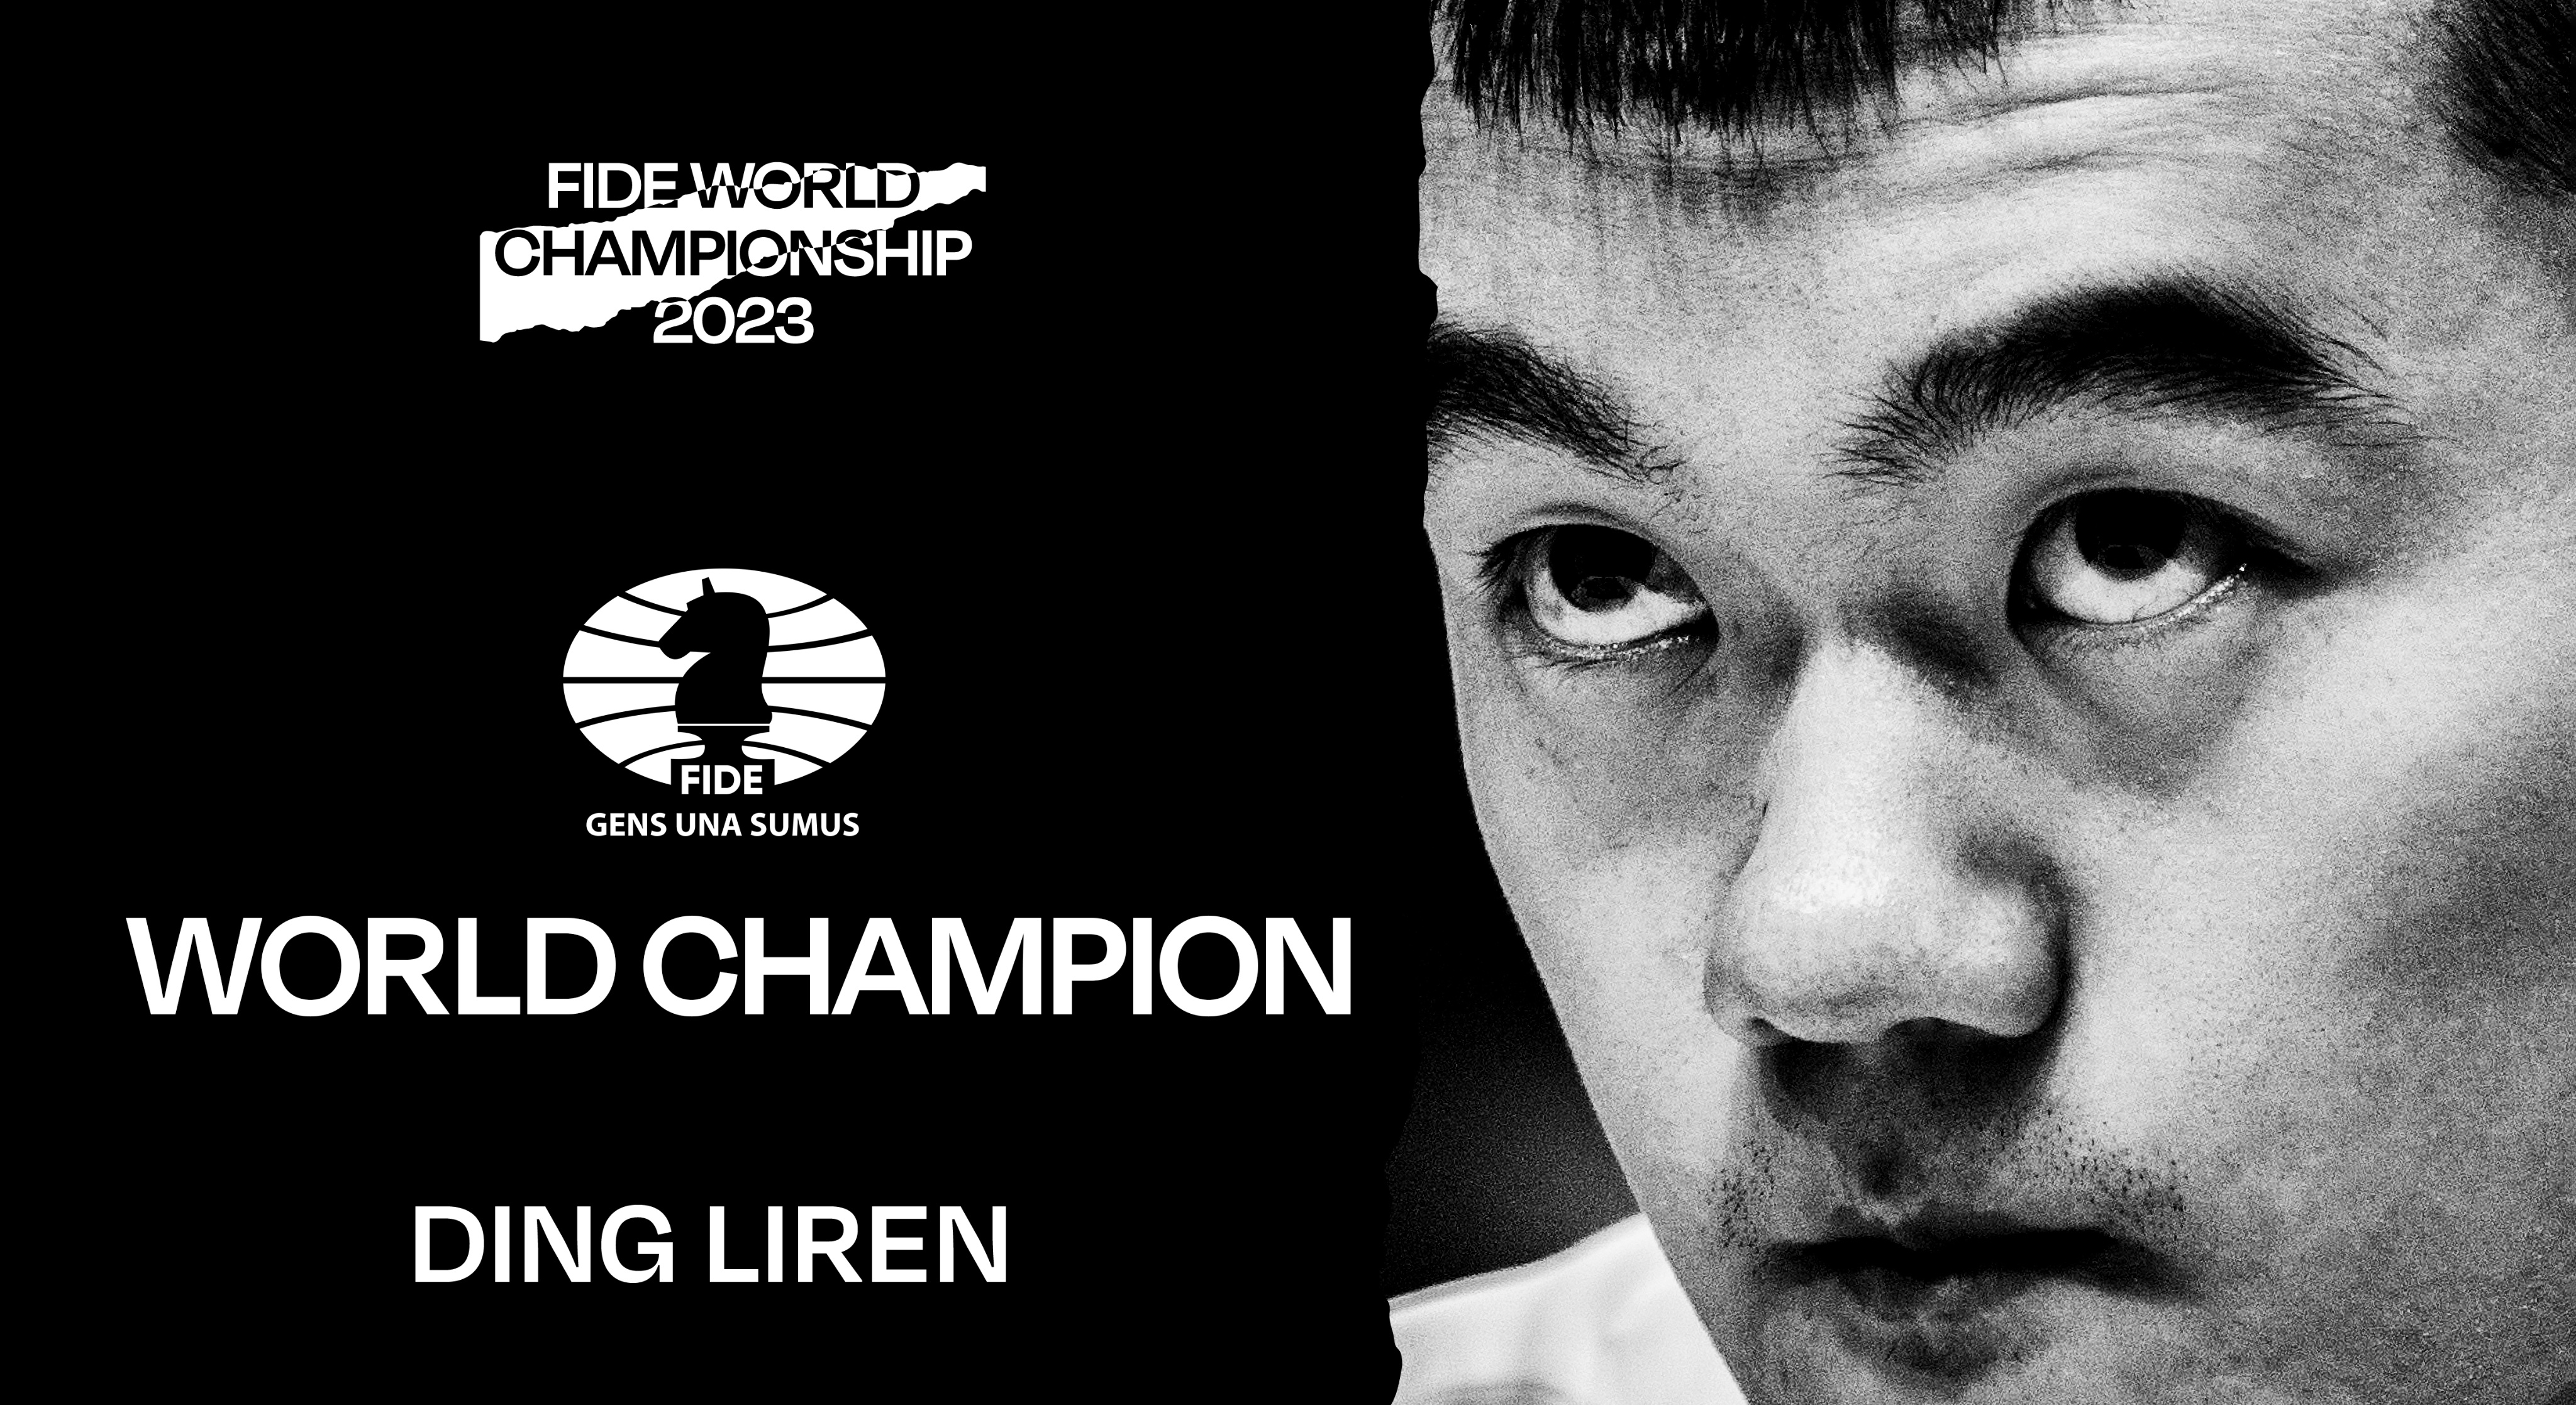 Congratulations to Liren, Ding for this masterful move which crowned him  the 2023 World FIDE Chess Champion! : r/AnarchyChess